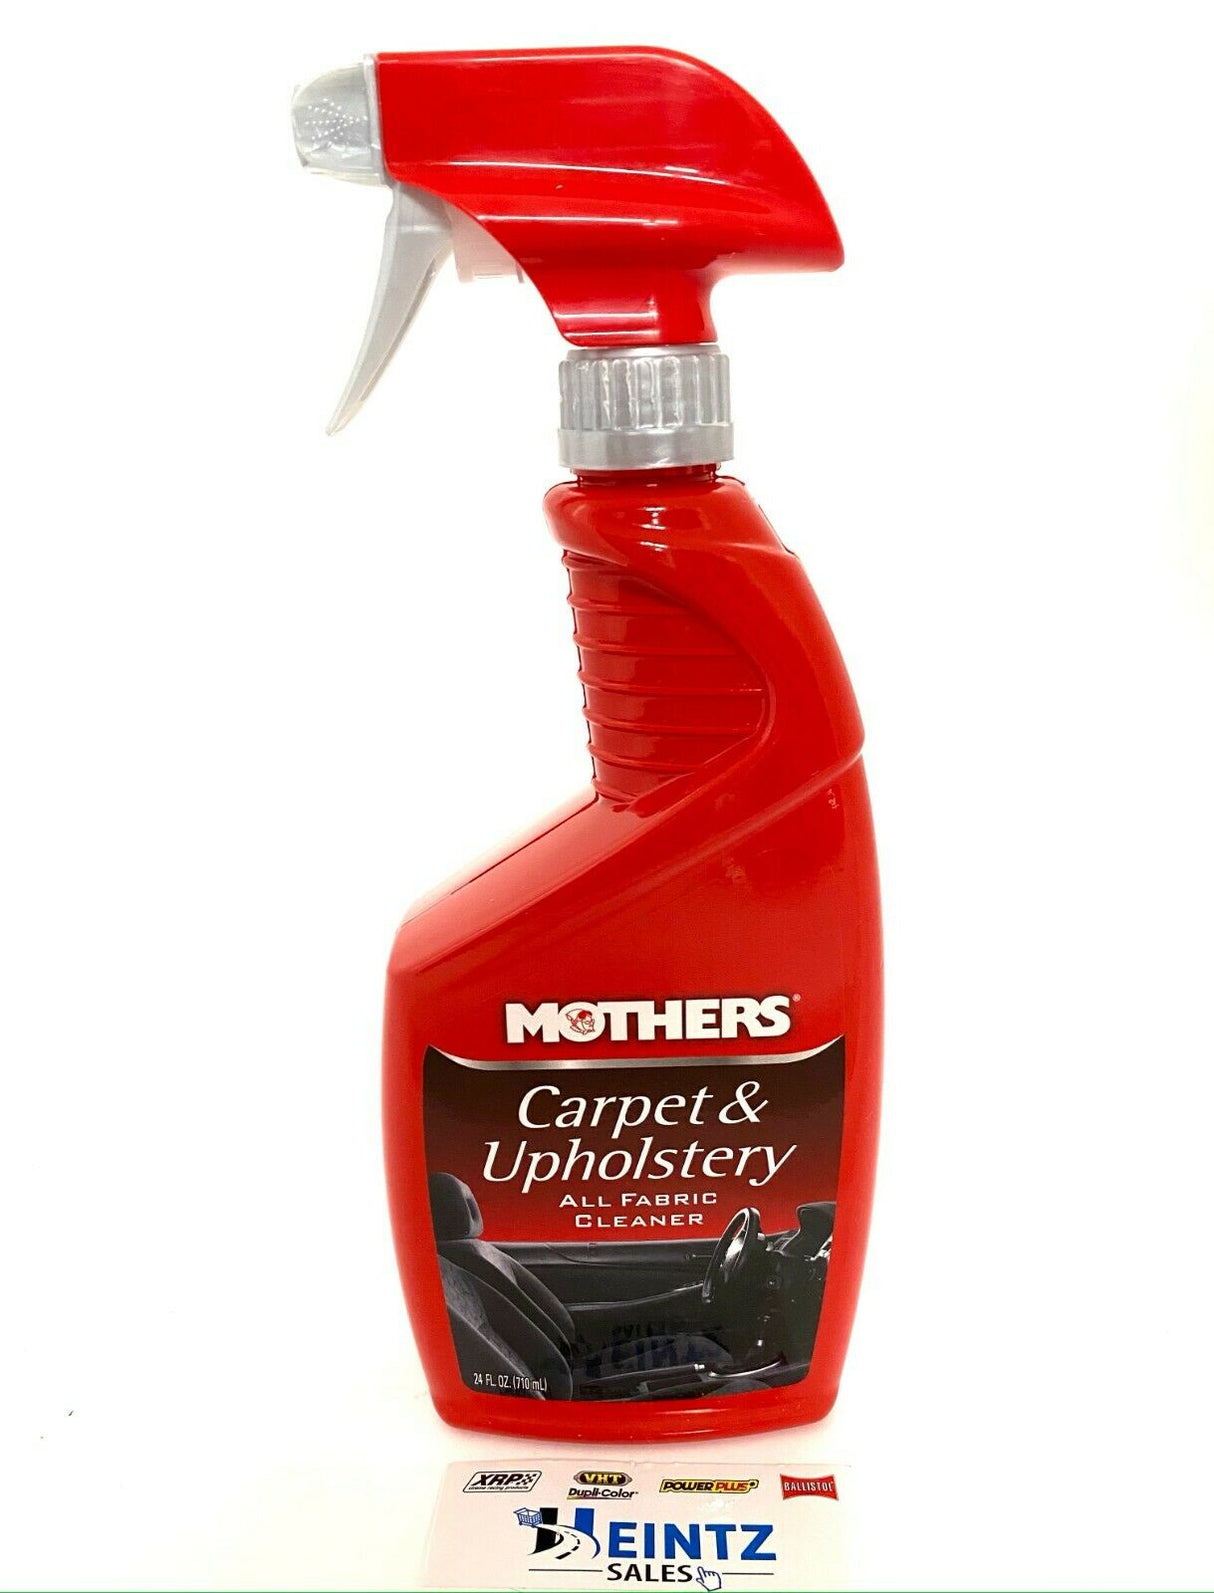 MOTHERS 05424 Carpet & Upholstery - All Fabric Cleaner - Vinyl - Cloth - 24 fl. oz.